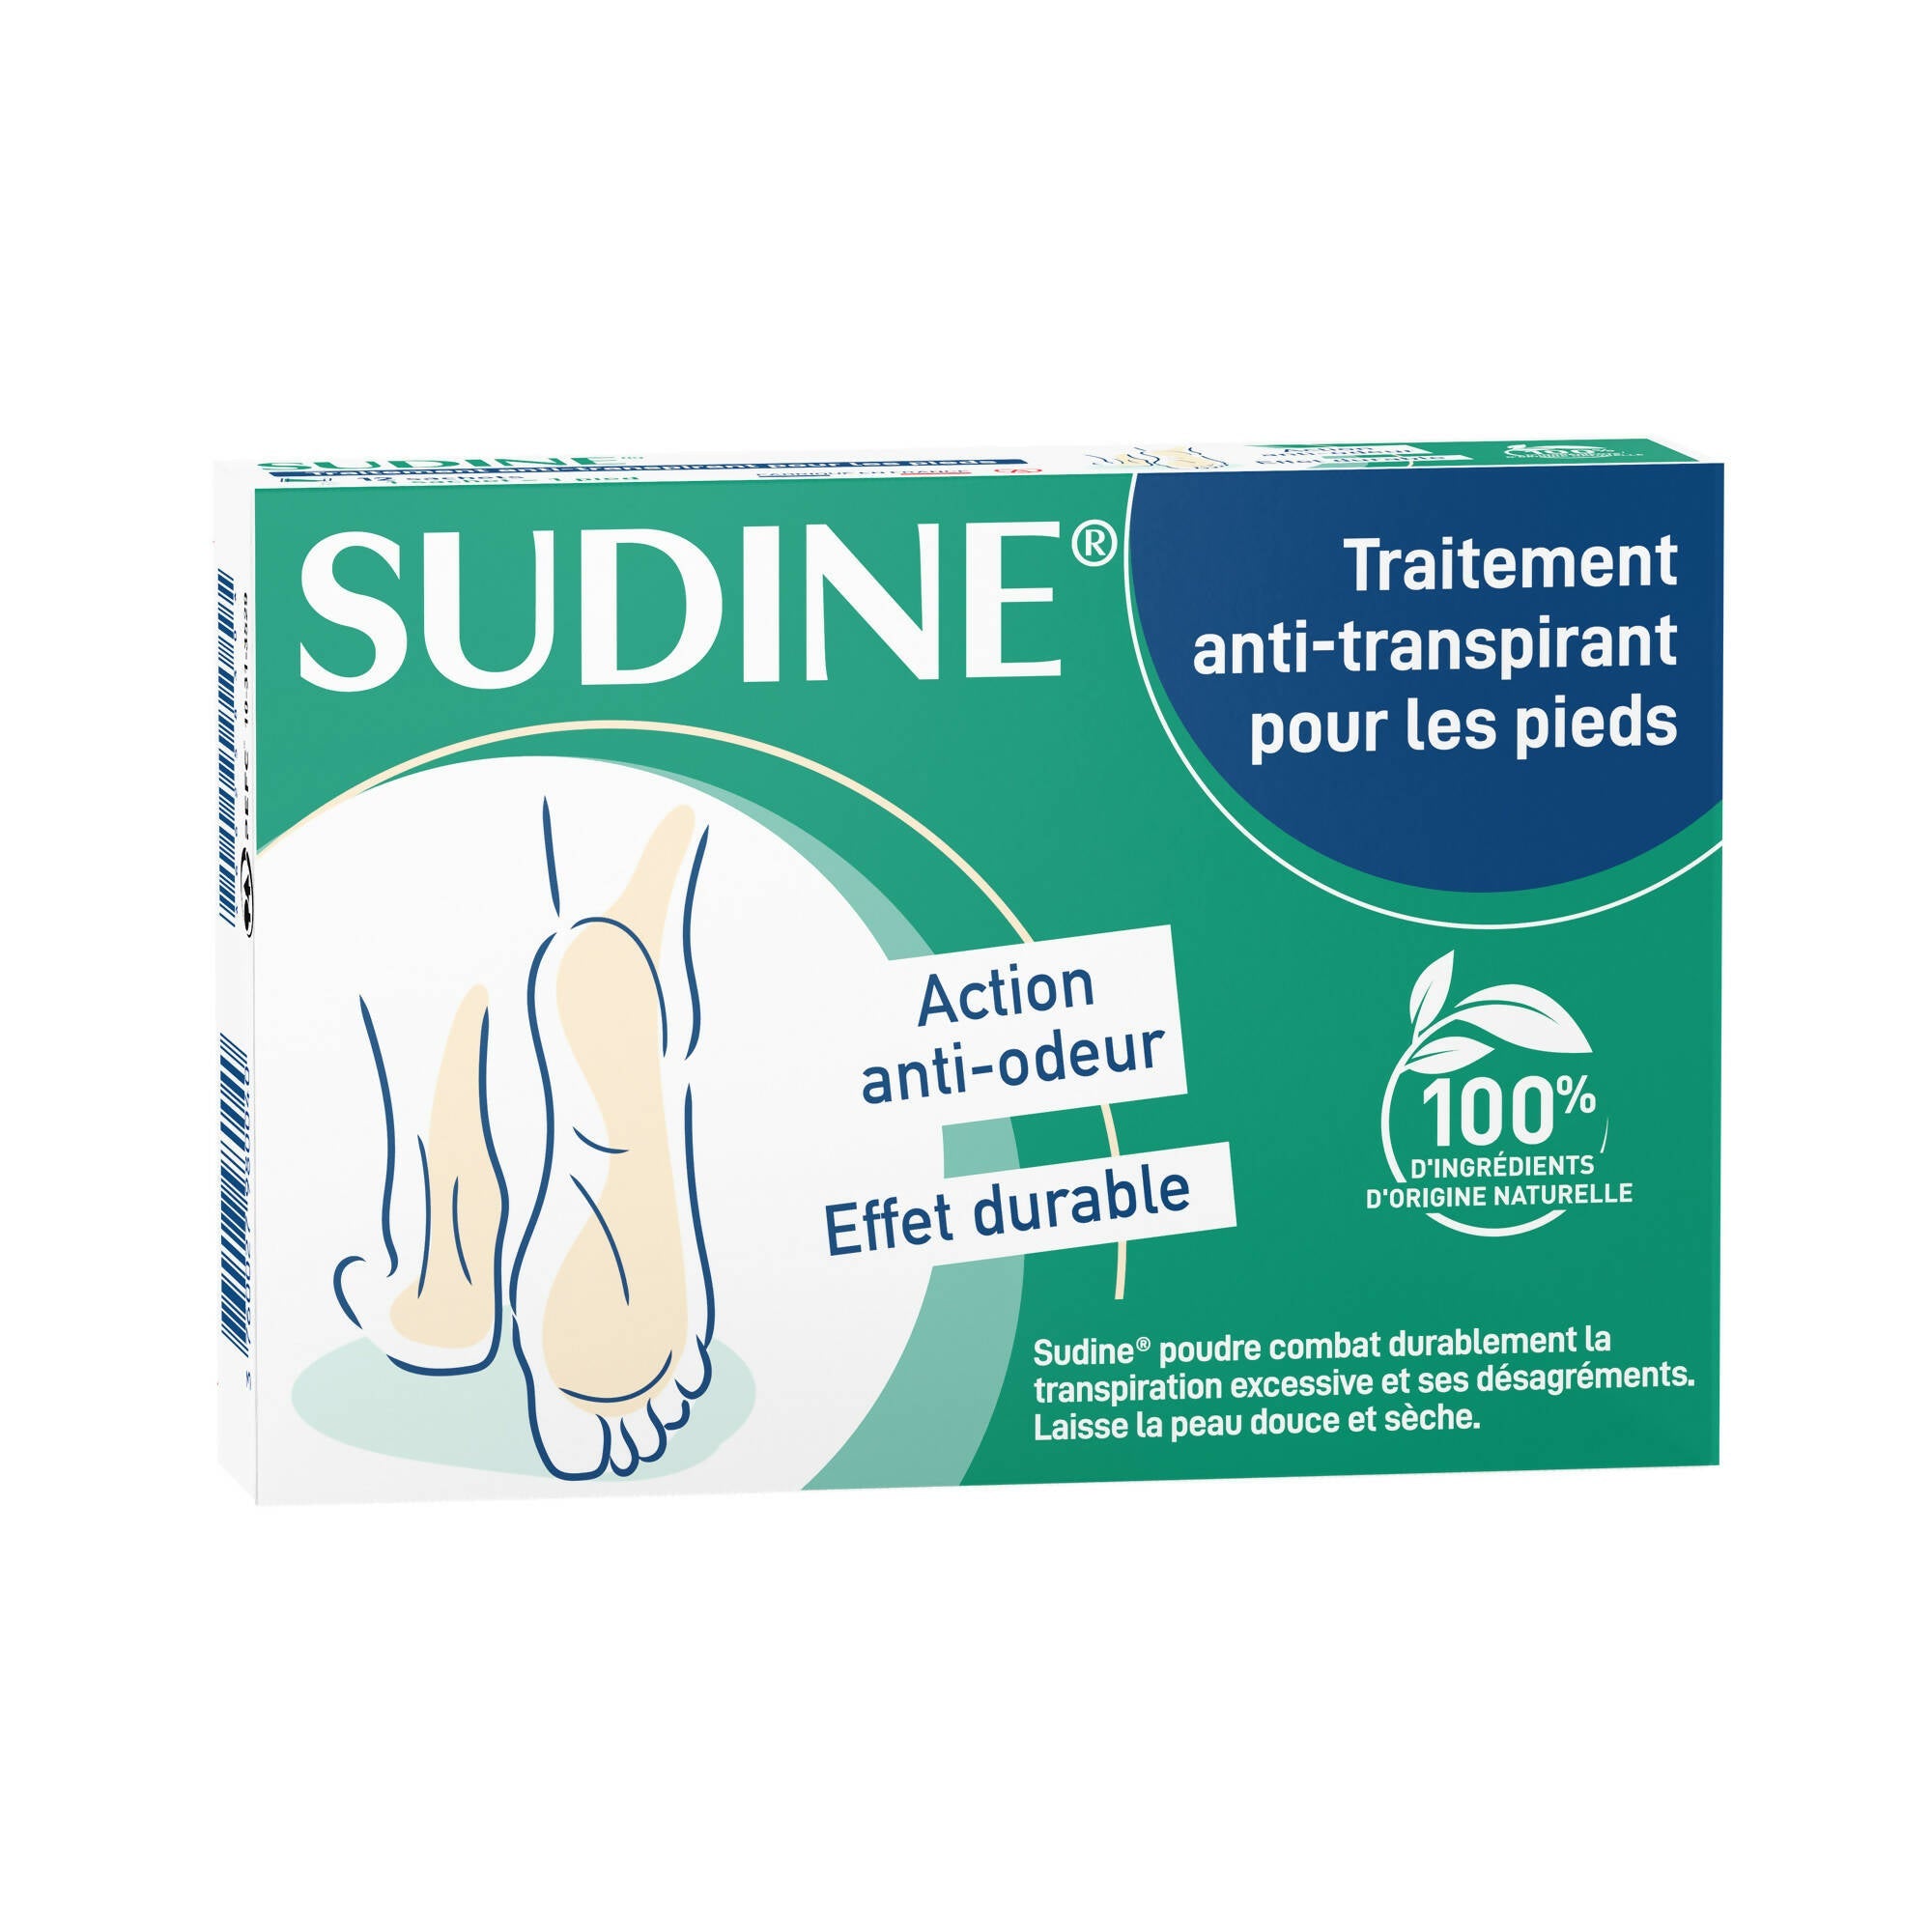 SORIFA - Complete box of 80 - Sudine Antiperspirant Treatment Powder - Foot - Regulates perspiration - Absorbs - Prevents mycoses - Without aluminum salts - Made in France - Box of 6 double sachets - 0